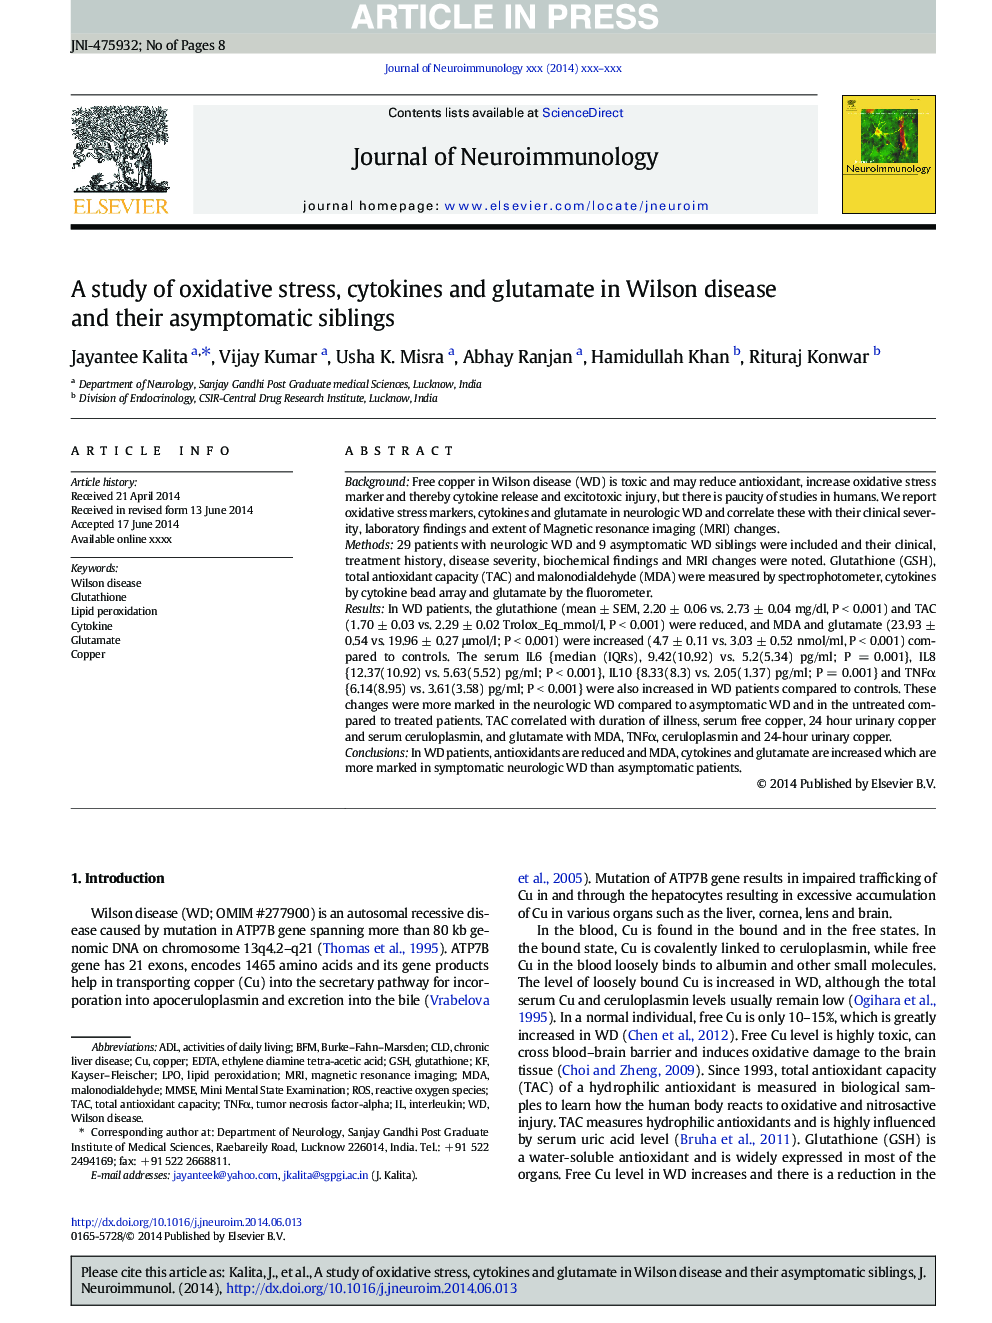 A study of oxidative stress, cytokines and glutamate in Wilson disease and their asymptomatic siblings